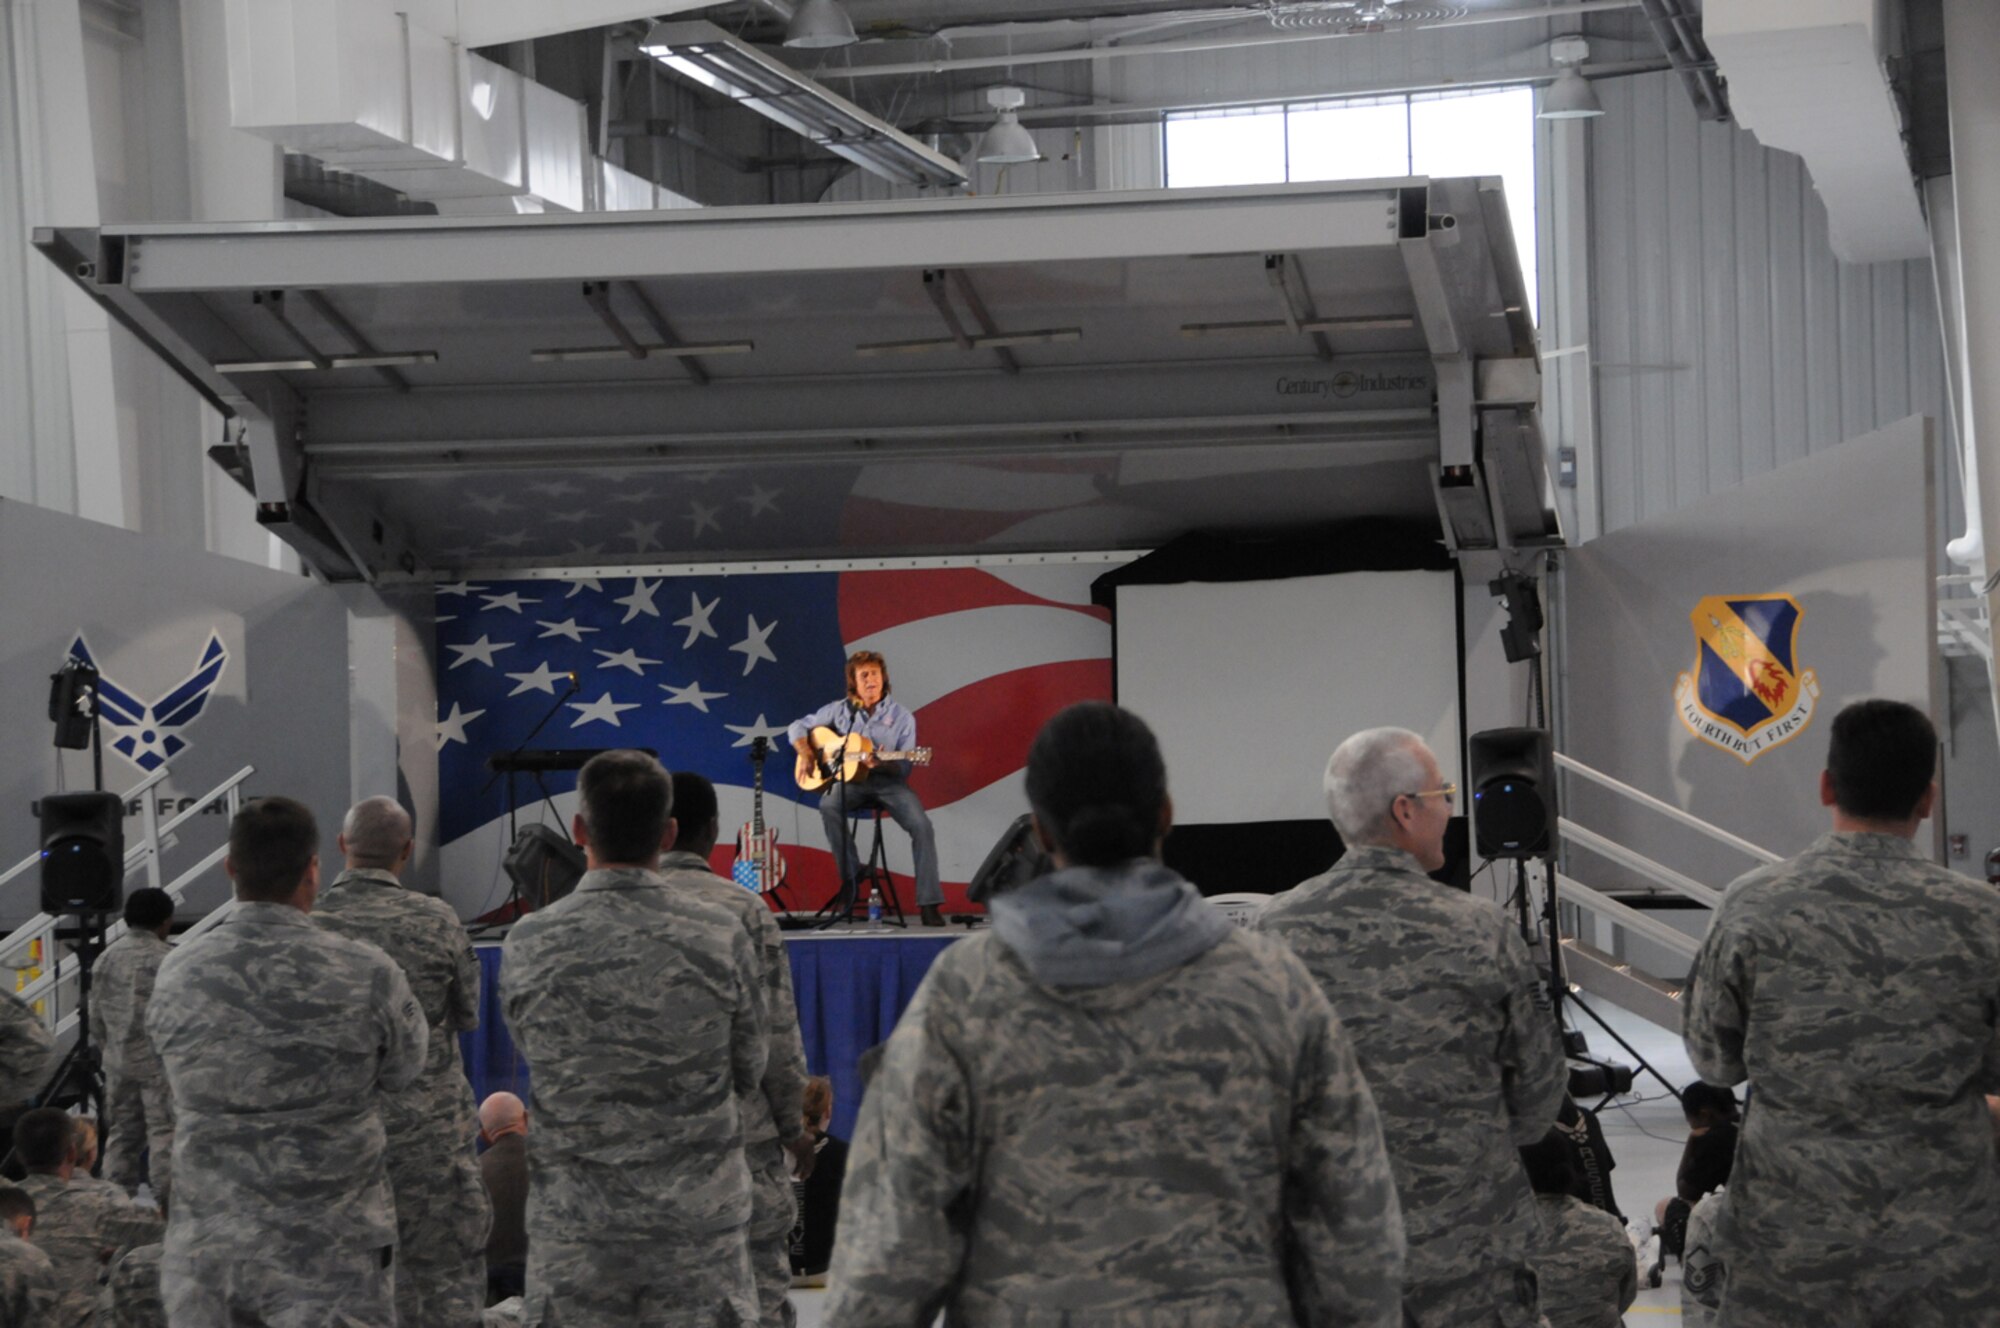 Singer/songwriter John Parr gave a concert to the men and women of the 916th Air Refueling Wing on Dec. 11 here. He included popular songs he wrote in the 80s, but also new songs we wrote specifically for America's armed forces. (USAF photo by Tech. Sgt. Scotty Sweatt, 916ARW/PA) 

